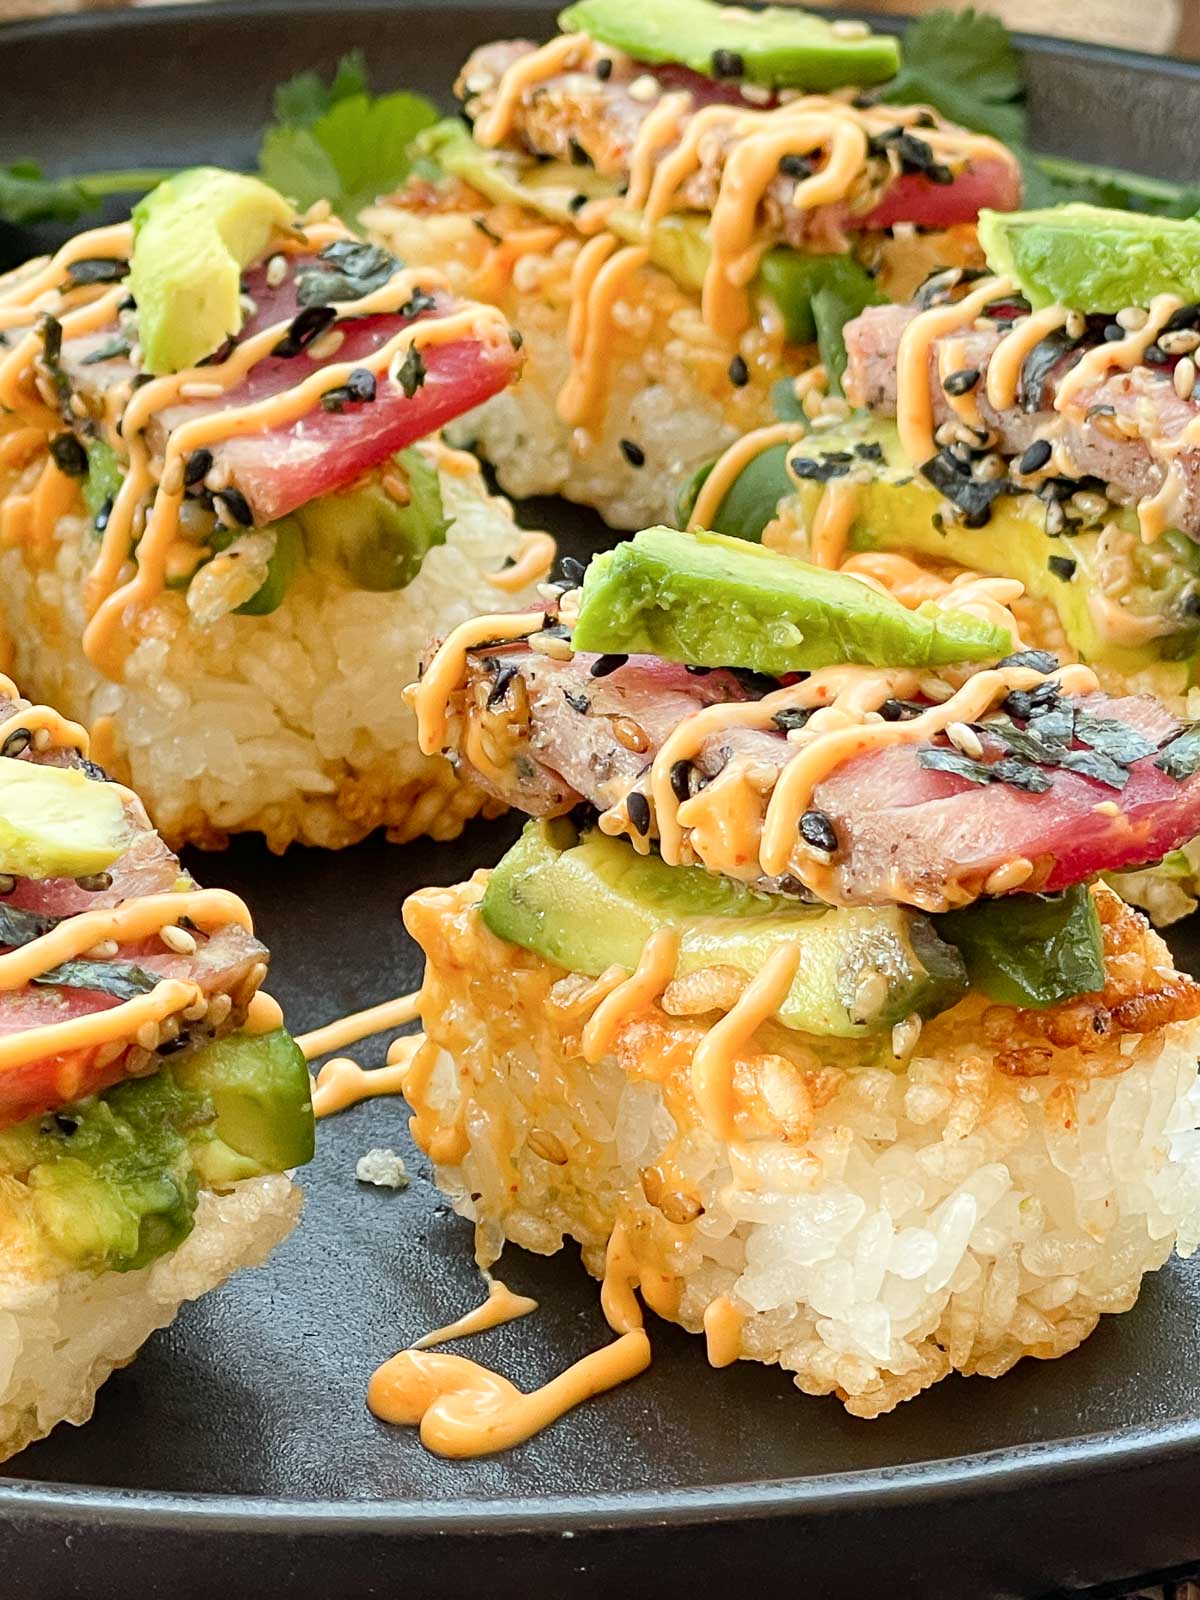 Spicy tuna crispy rice bites topped with avocado and tuna sushi drizzled with a sriracha aioli placed on top of a black plate.